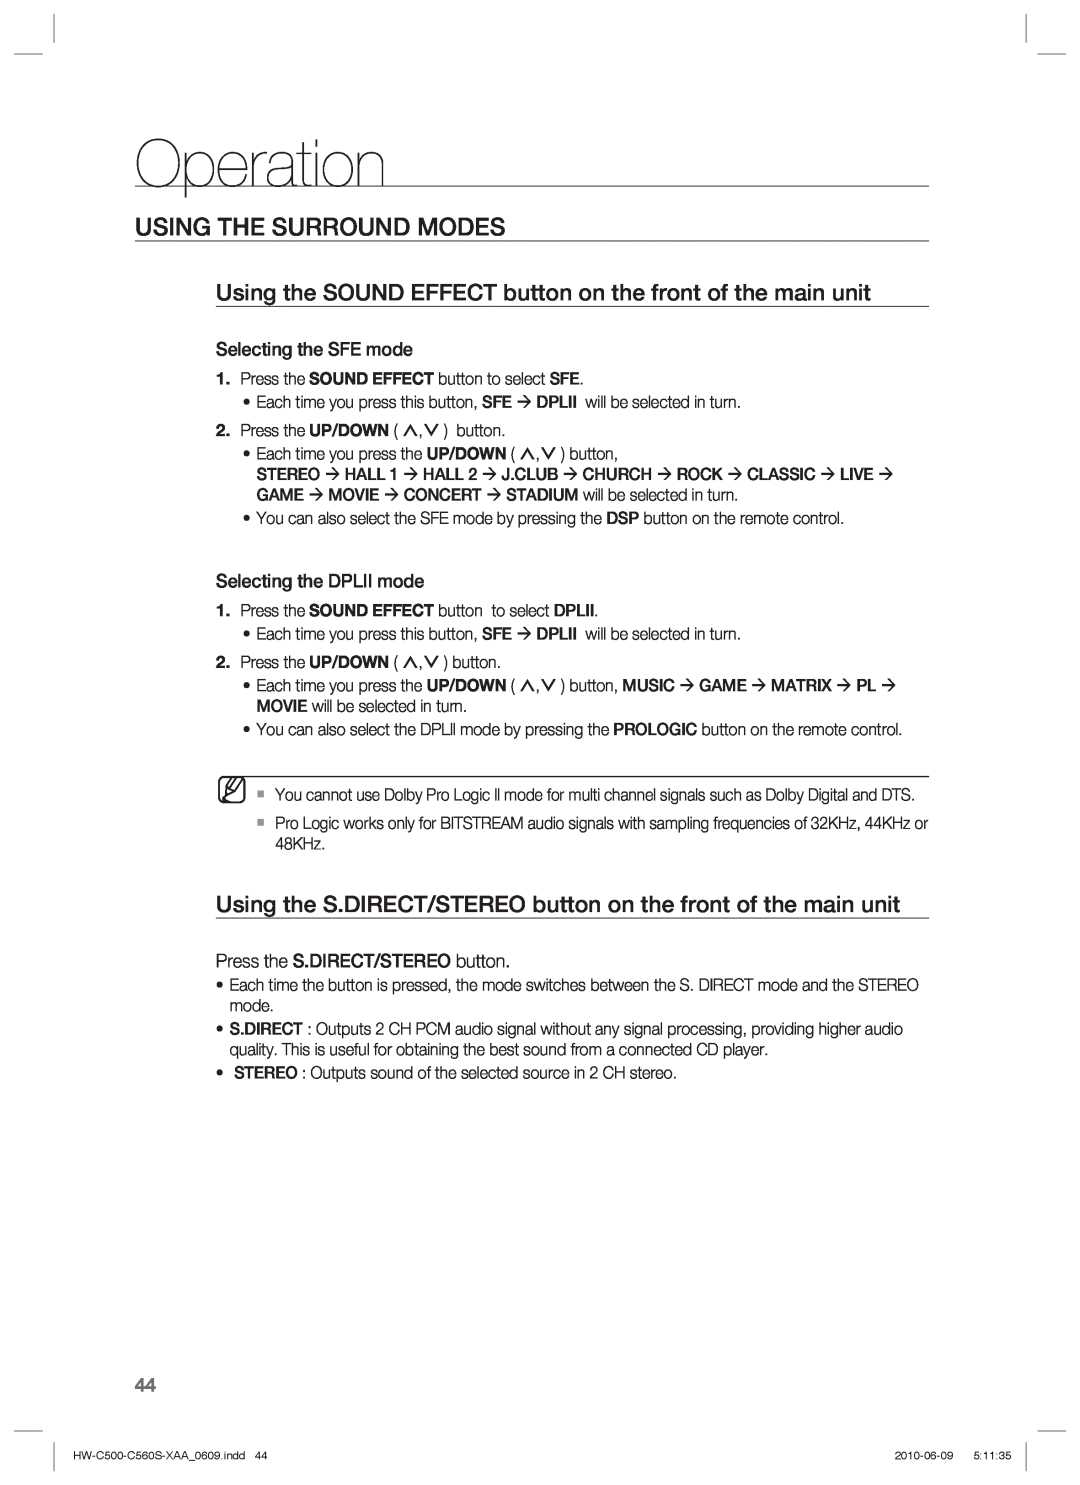 Samsung HW-C500, HW-C560S user manual Operation, Using The Surround Modes 